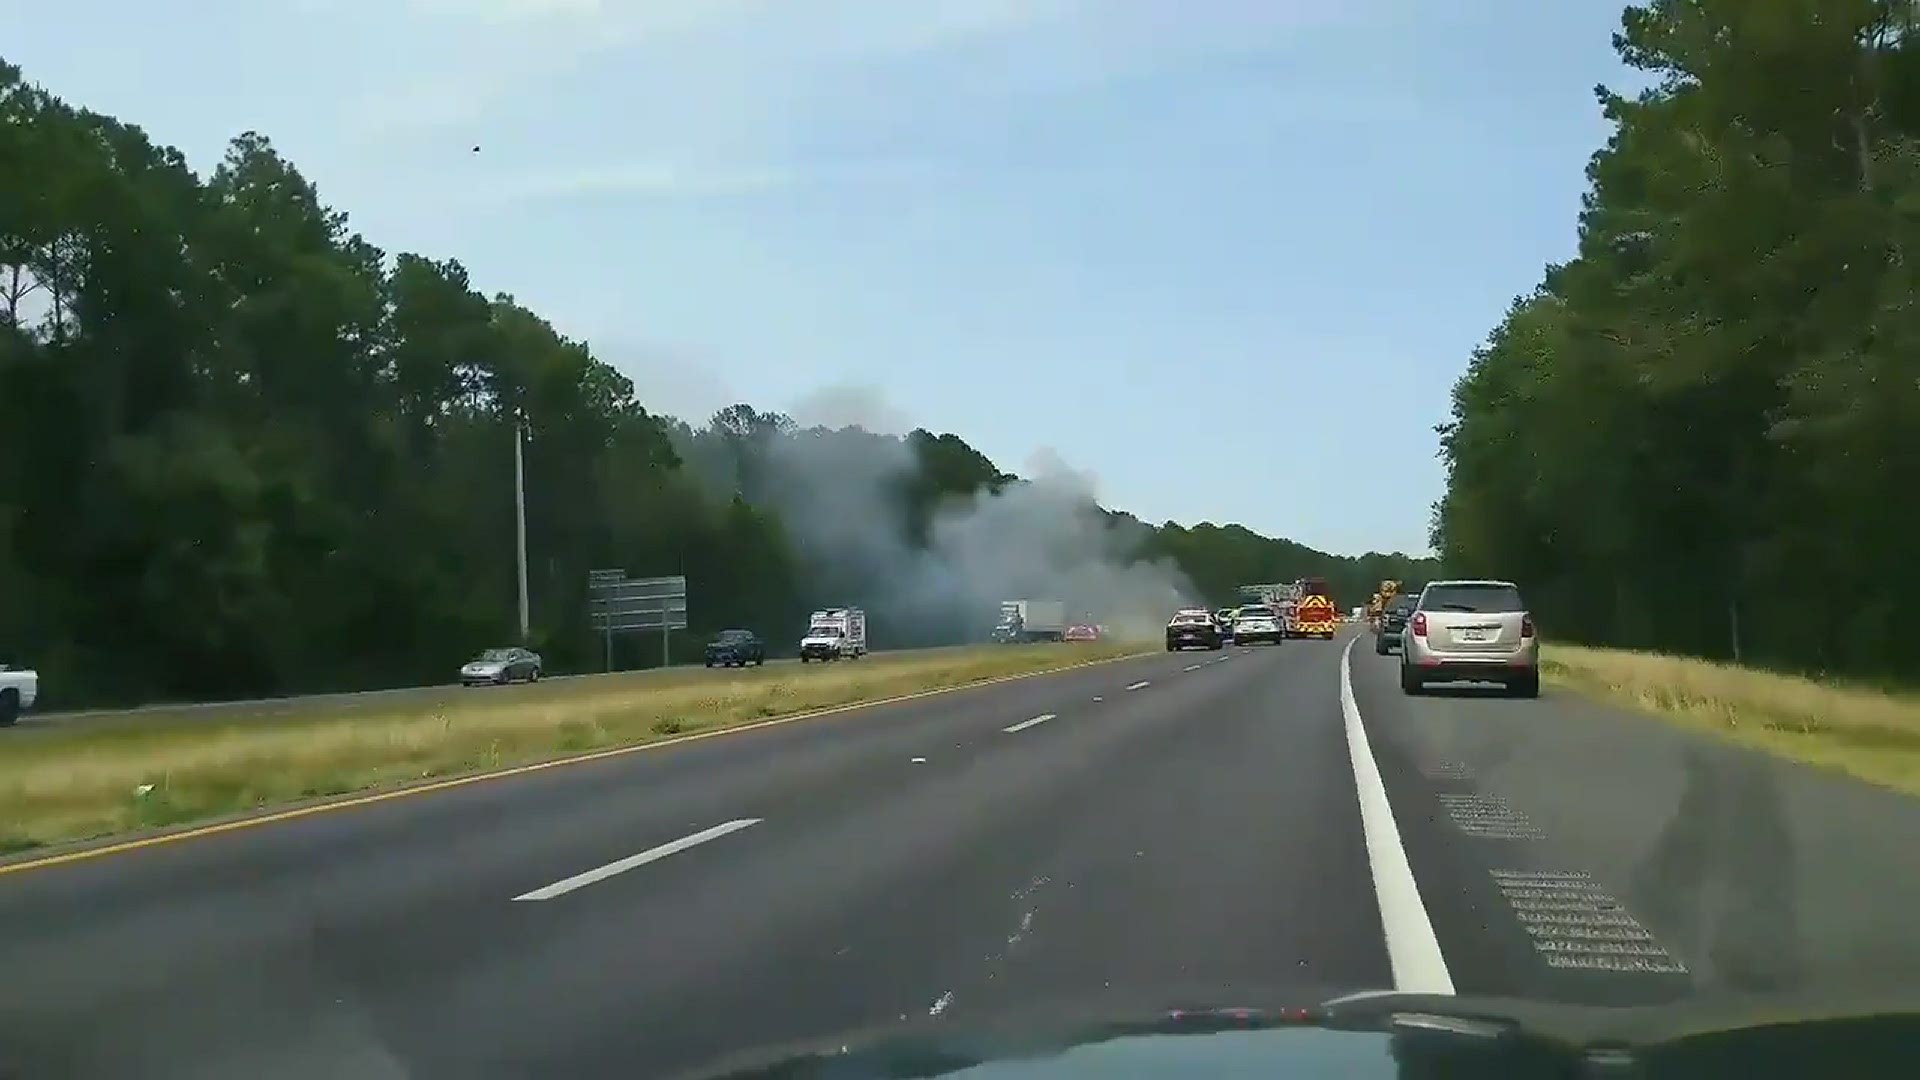 A car caught on fire on Insterstate 295 at Lem Turner Road, shutting down traffic in both directions.